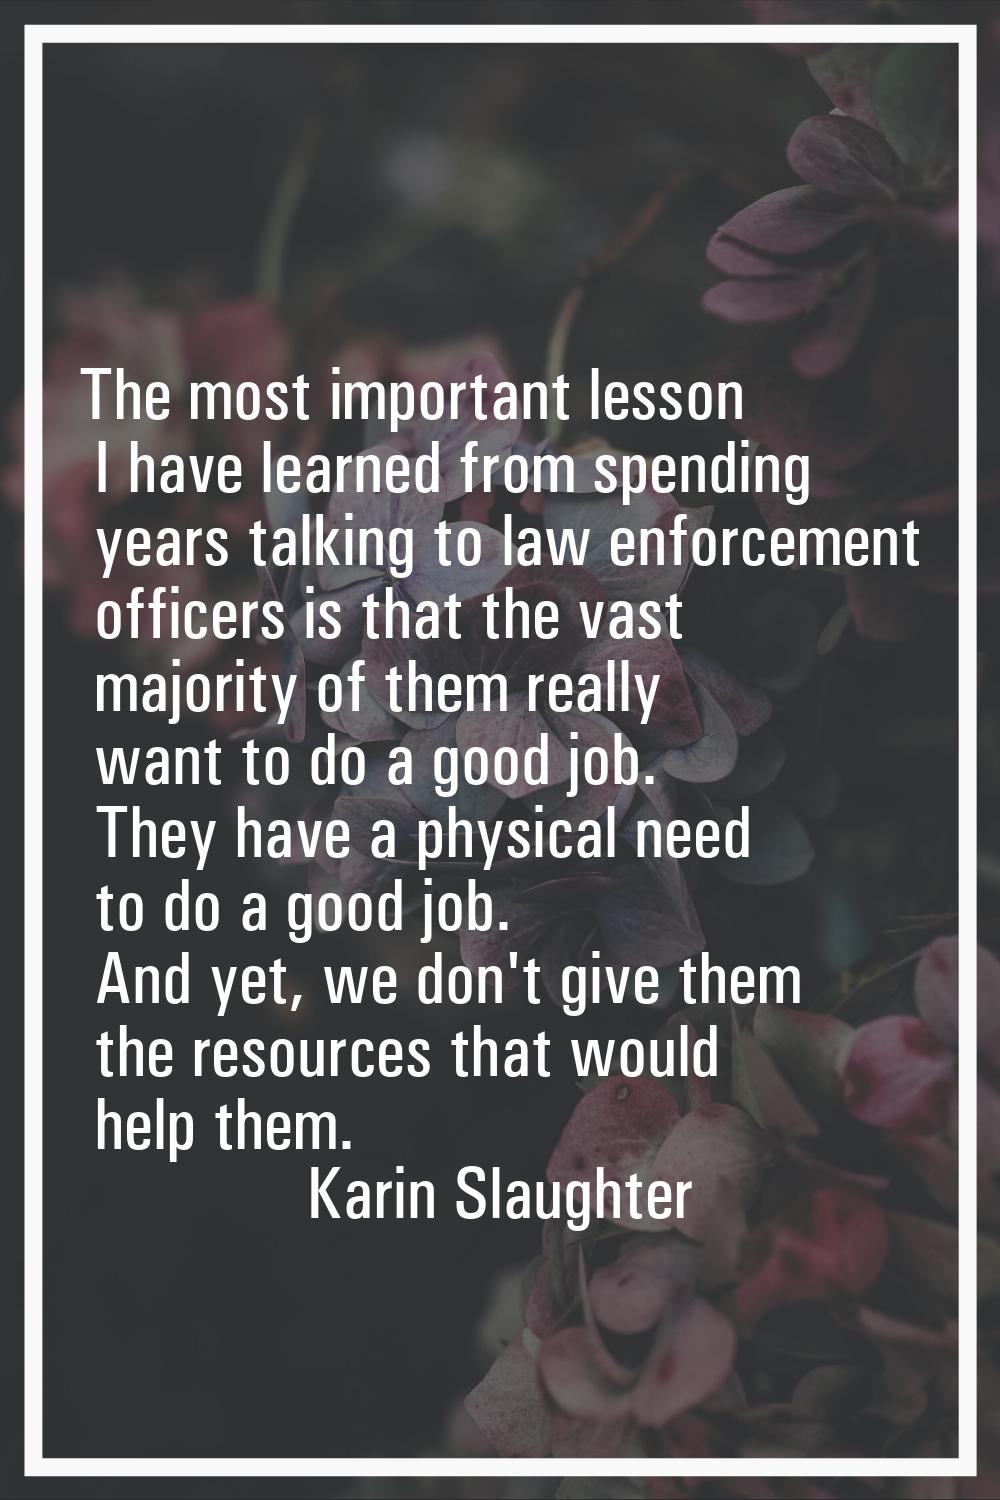 The most important lesson I have learned from spending years talking to law enforcement officers is